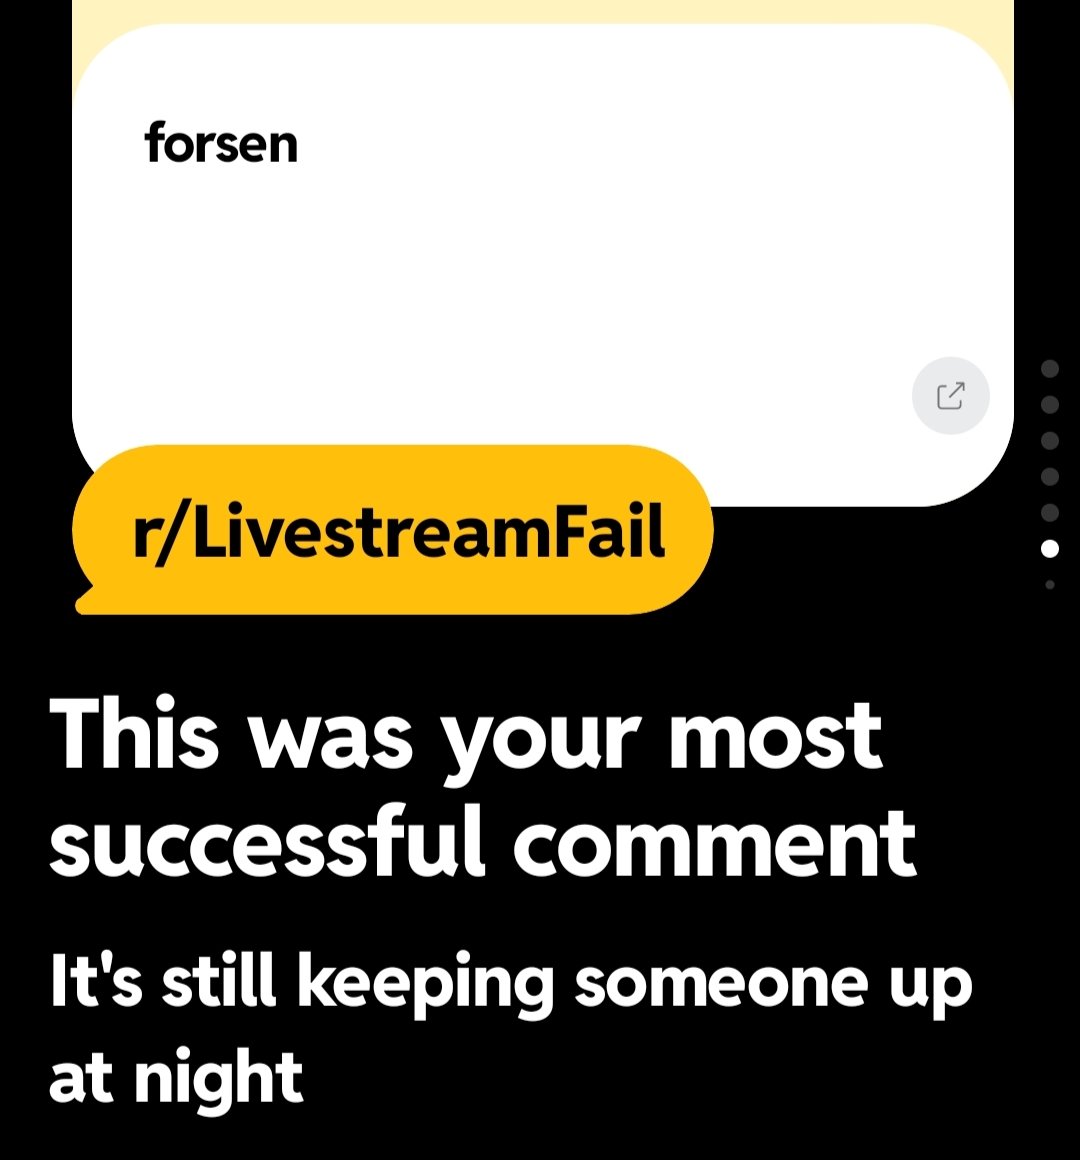 forsen has been moved to a new Cell : r/LivestreamFail